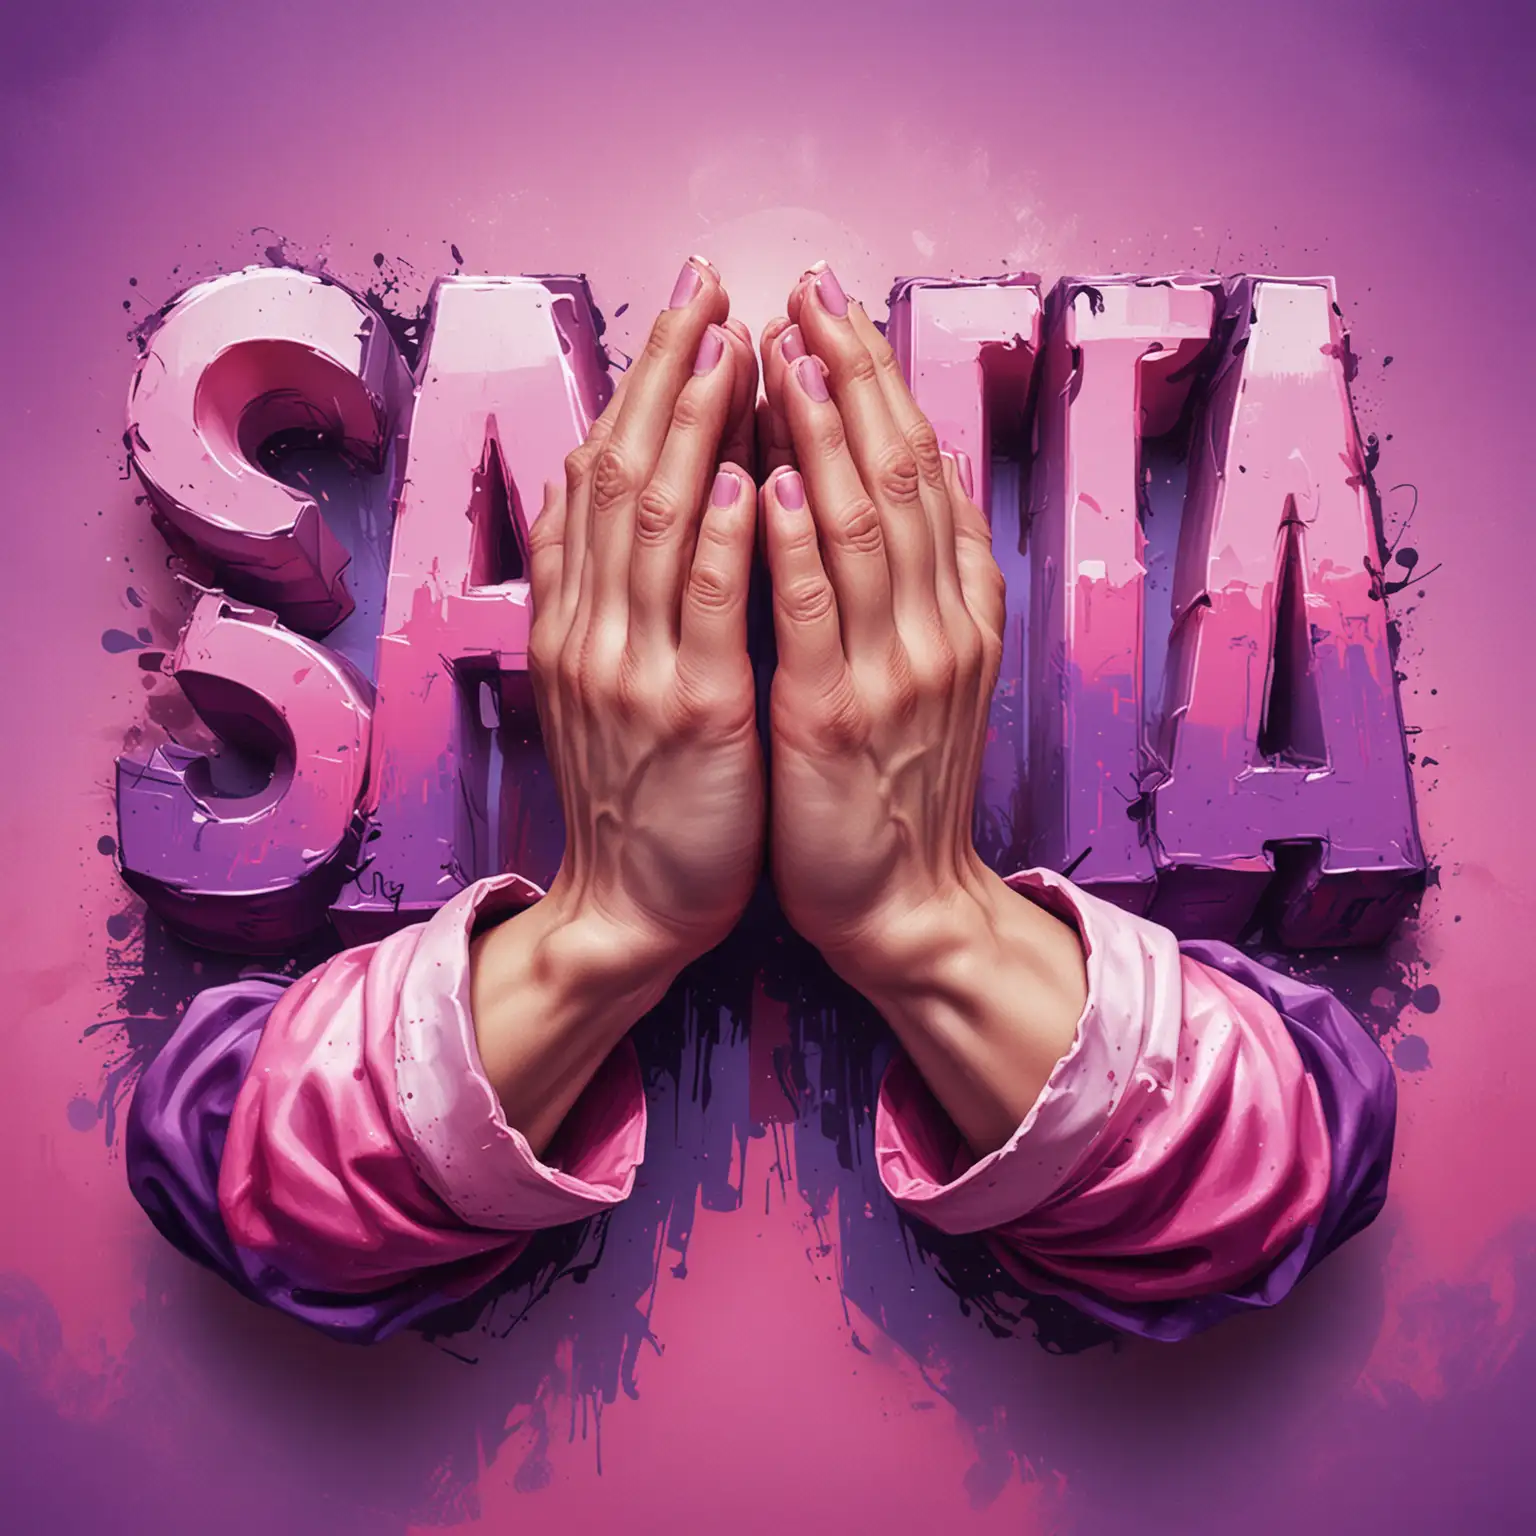 Praying Hands on Vibrant Purple and Pink Background with GraffitiStyle Santa Text